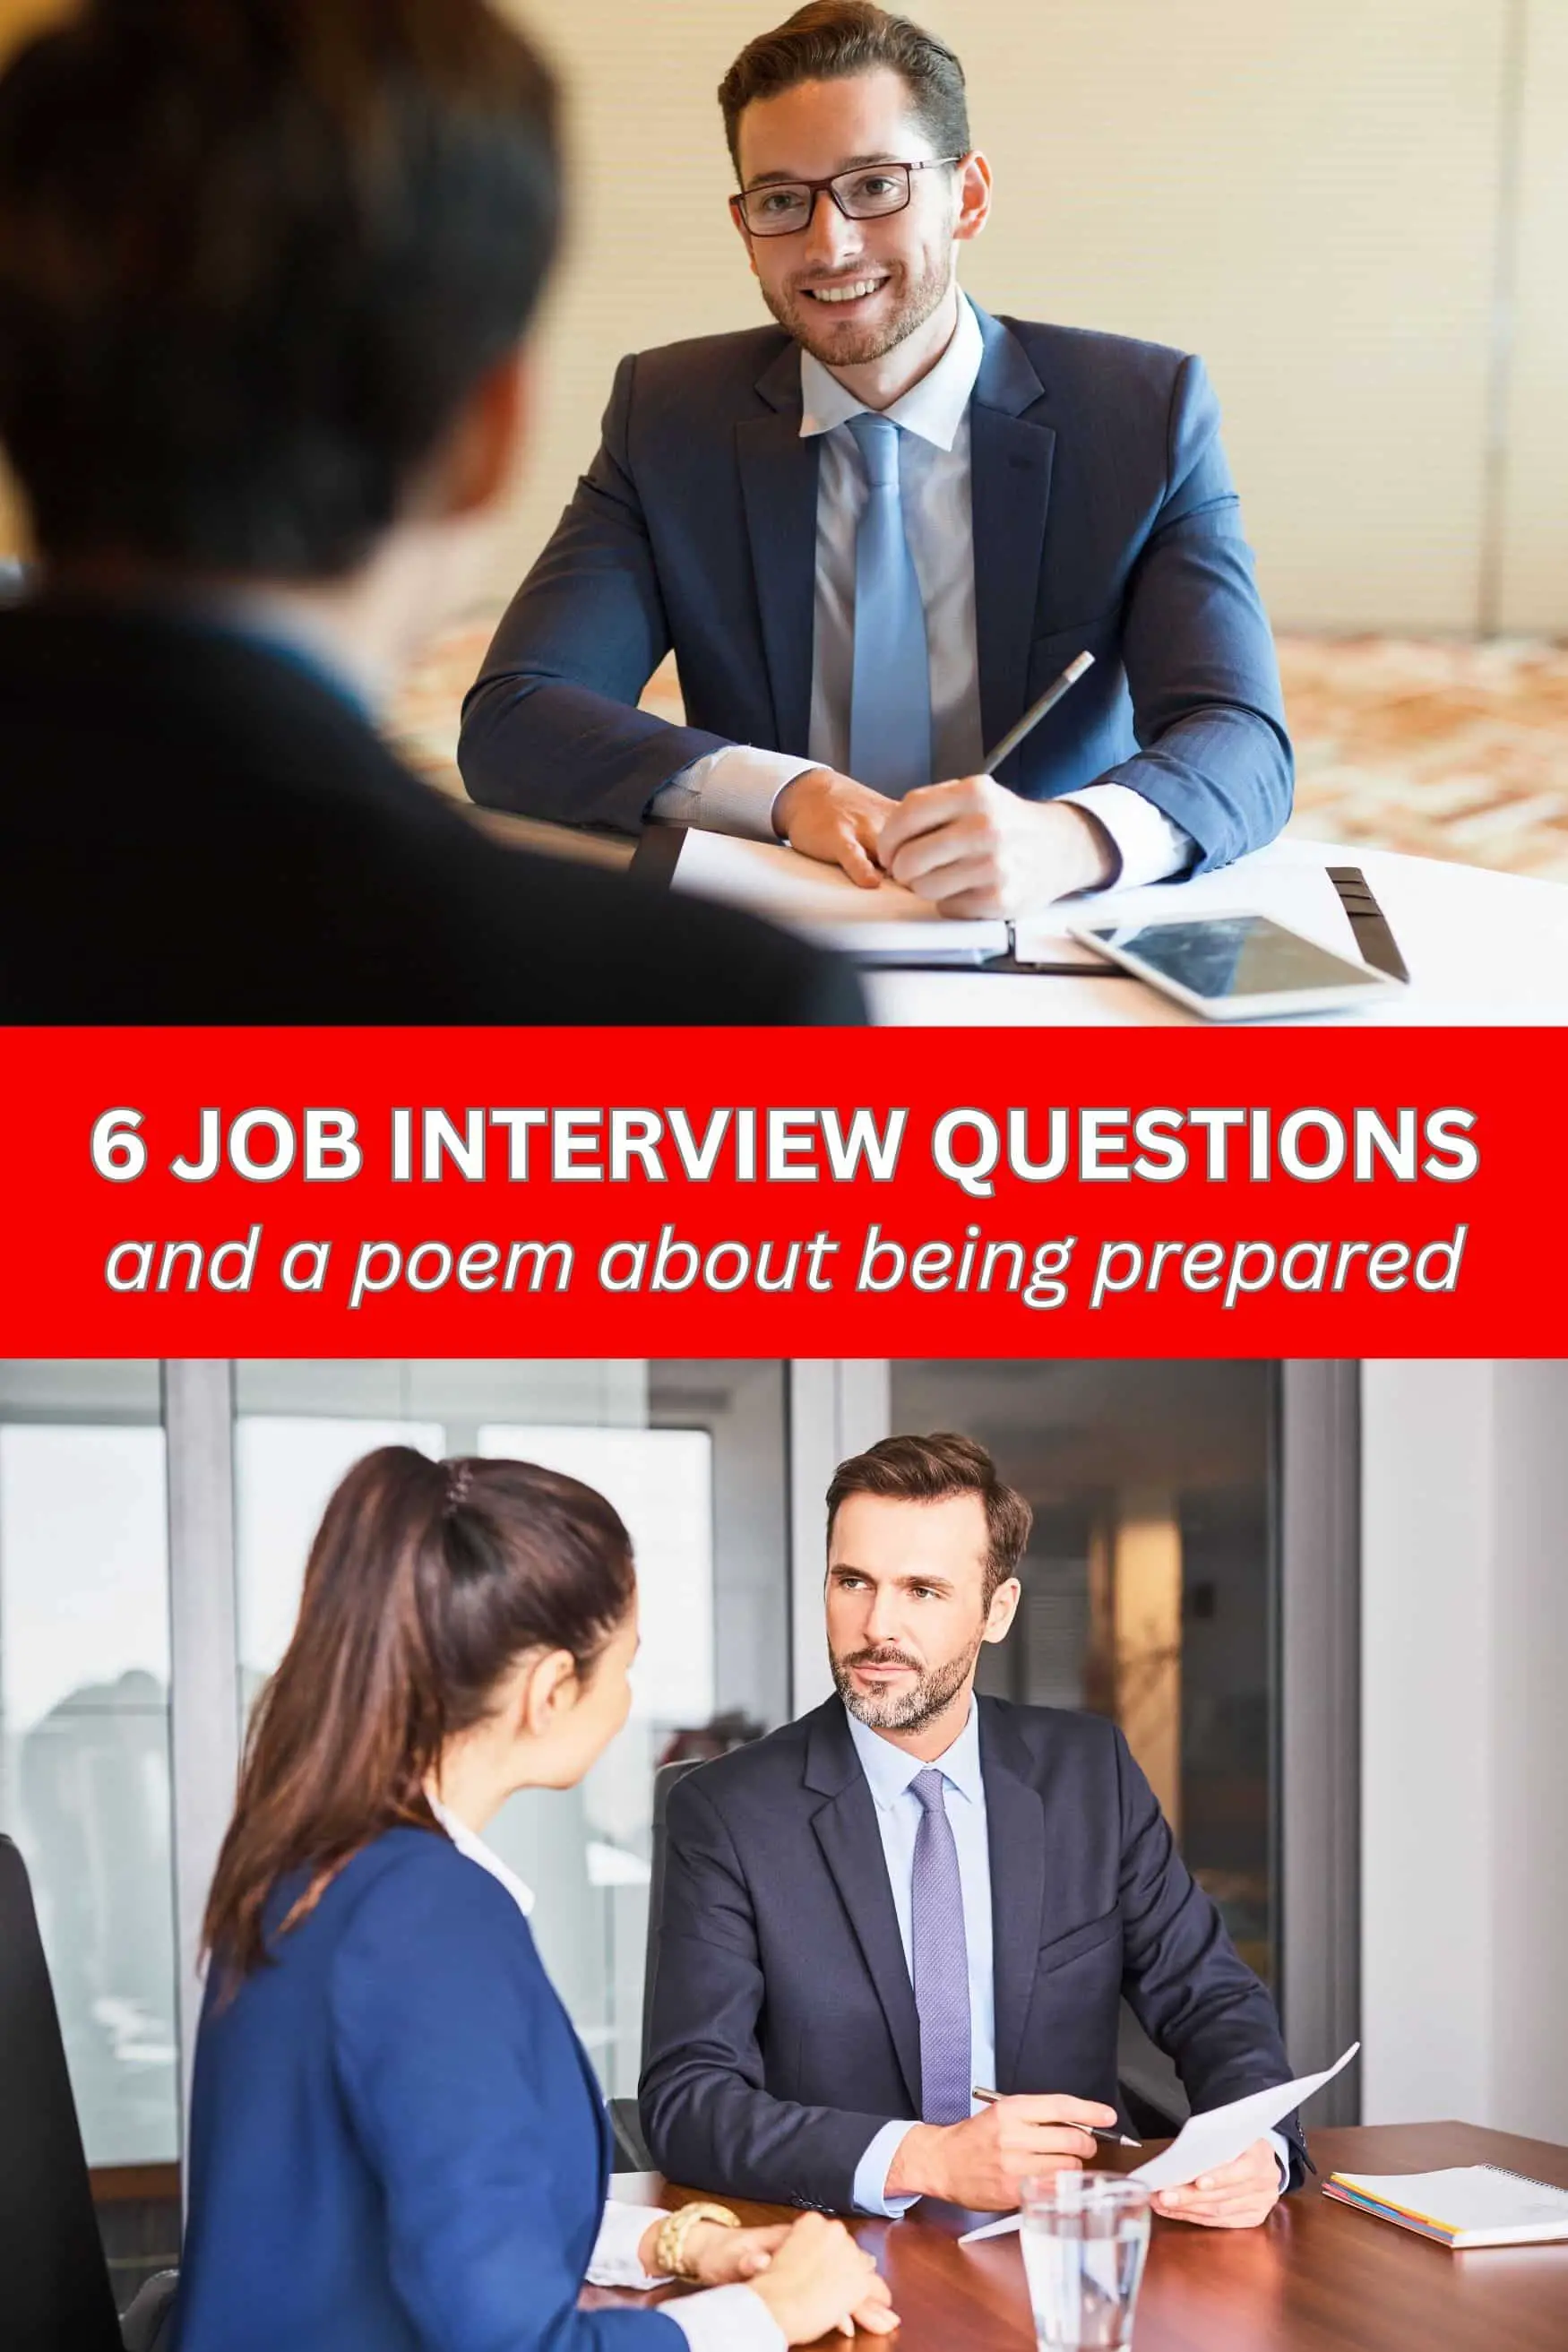 6 top job interview questions to help you prepare - Roy Sutton